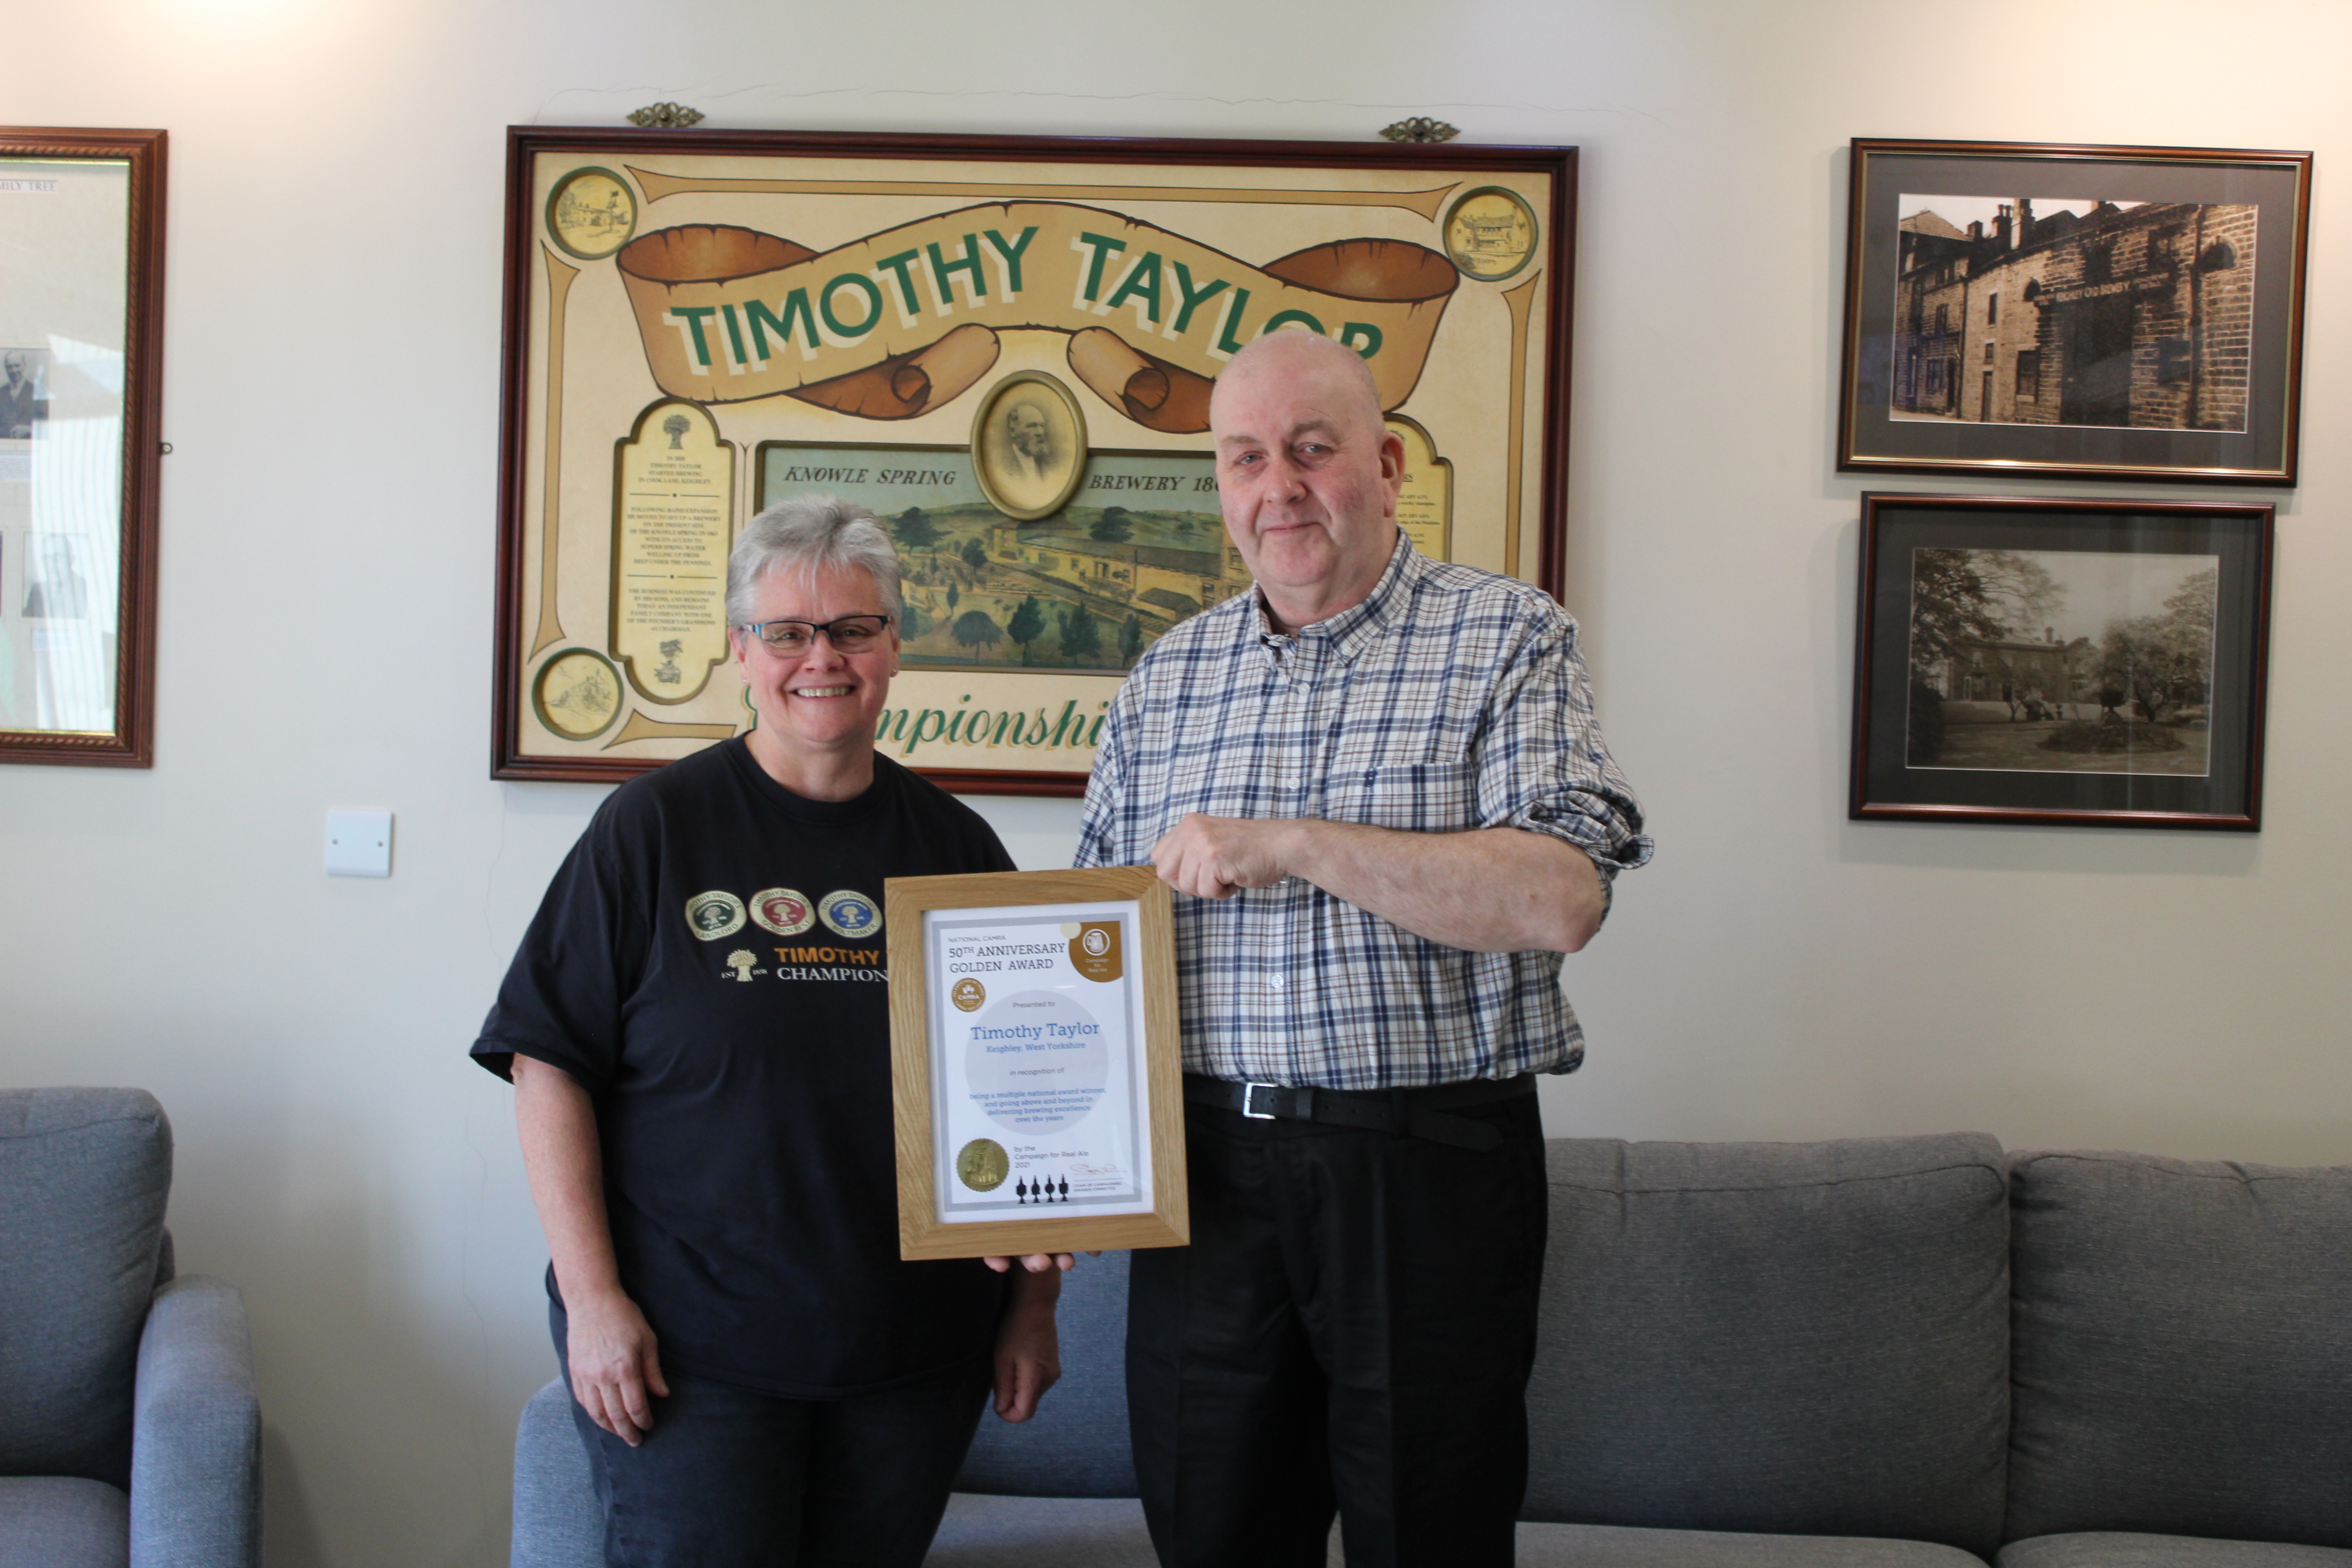 Timothy Taylor's POS & Sales Support Manager and CAMRA member, Colleen Holiday, being presented the Golden Award by CAMRA’s Yorkshire Regional Director, Kevin Keaveny